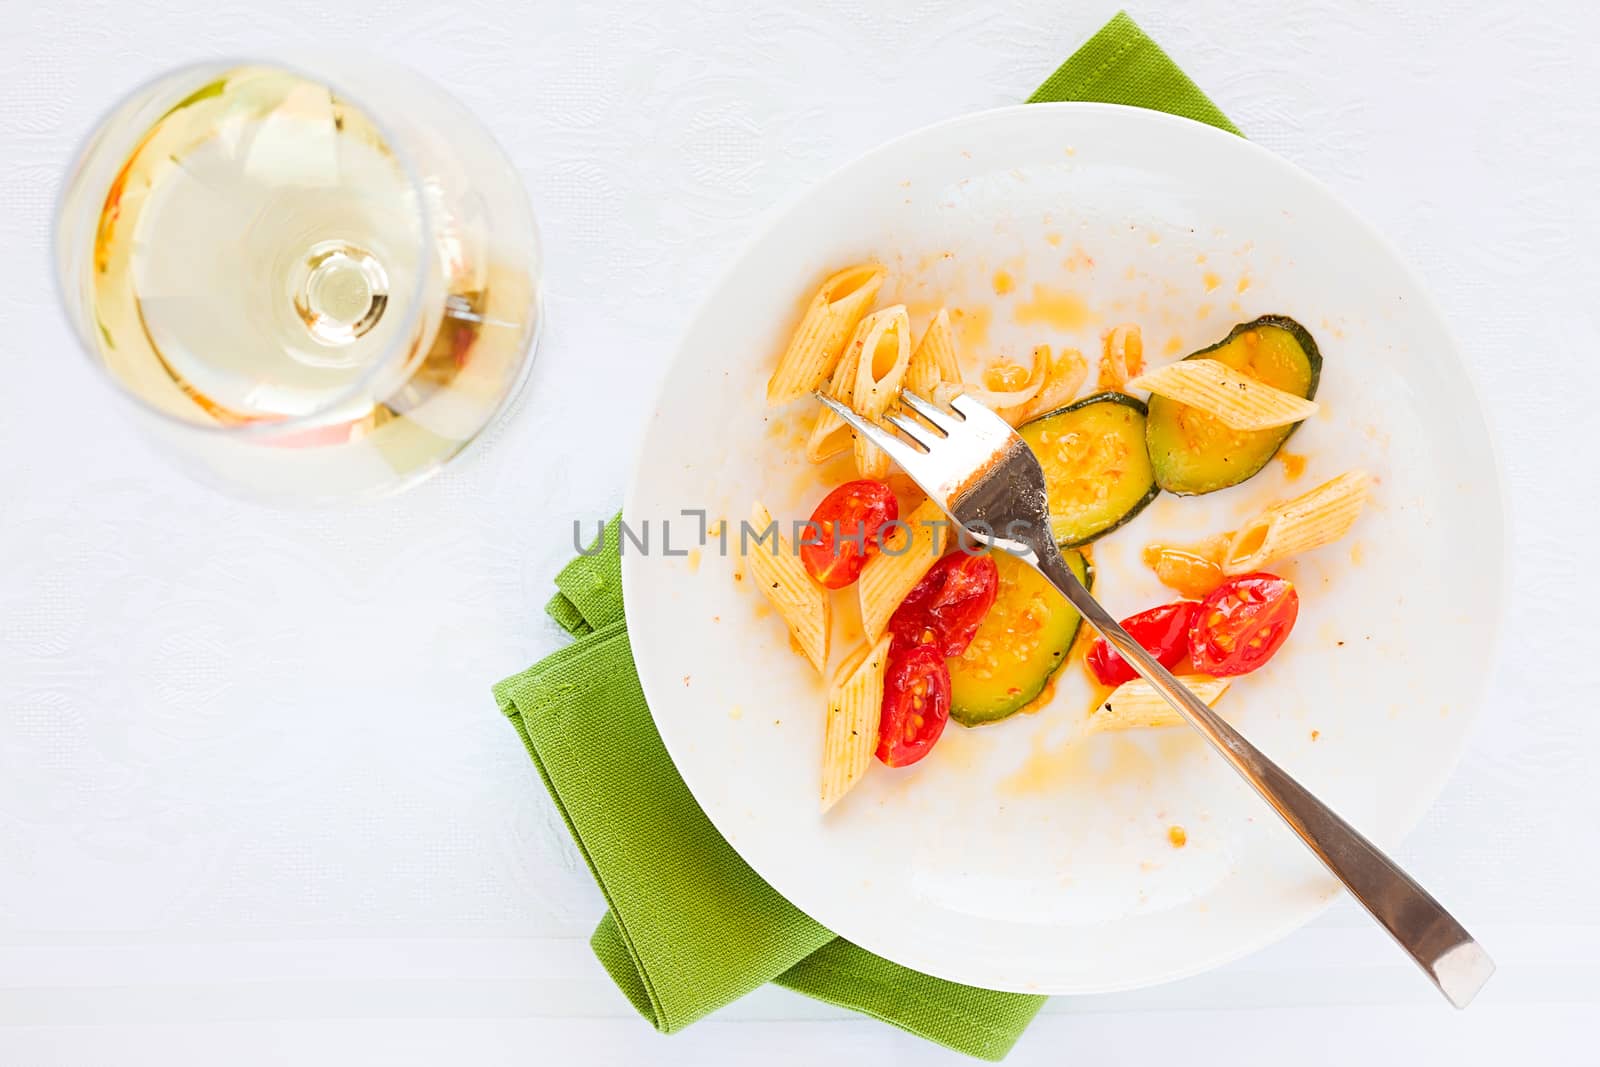 Traditional italian penne pasta with zucchini, cherry tomatoes and glass of white wine seen from above